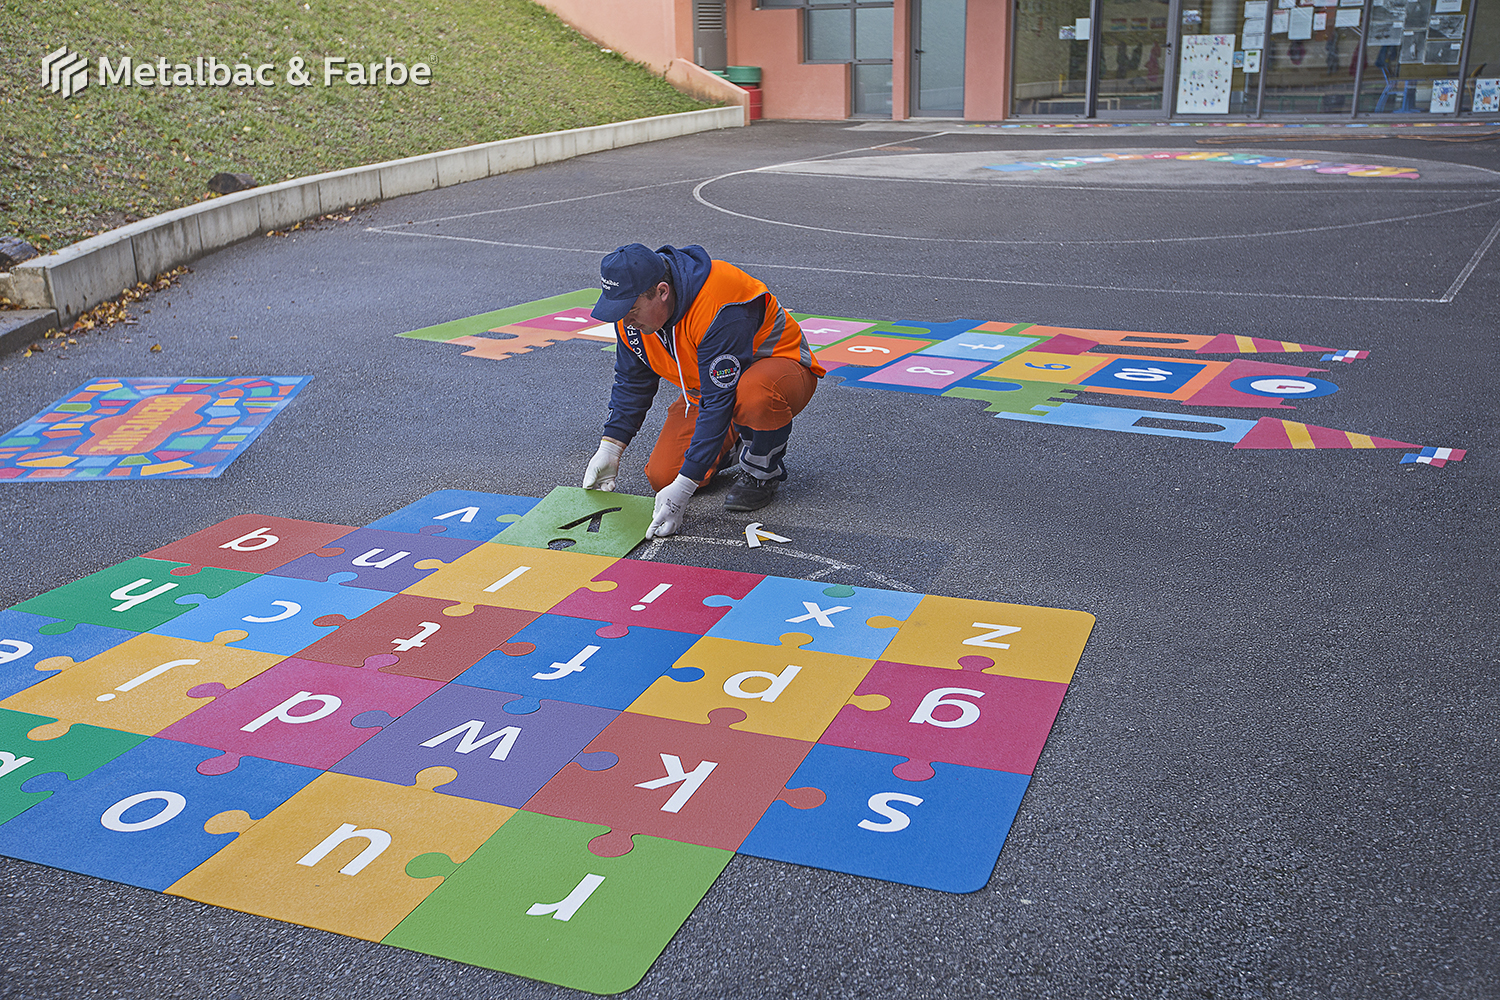 playground markings games; playground games for kids; outdoor play; math games; school yard games; educational games; asphalt games; interactive games; road markings signs; road traffic signs; parking lot stencils; caterpillar game; compass games